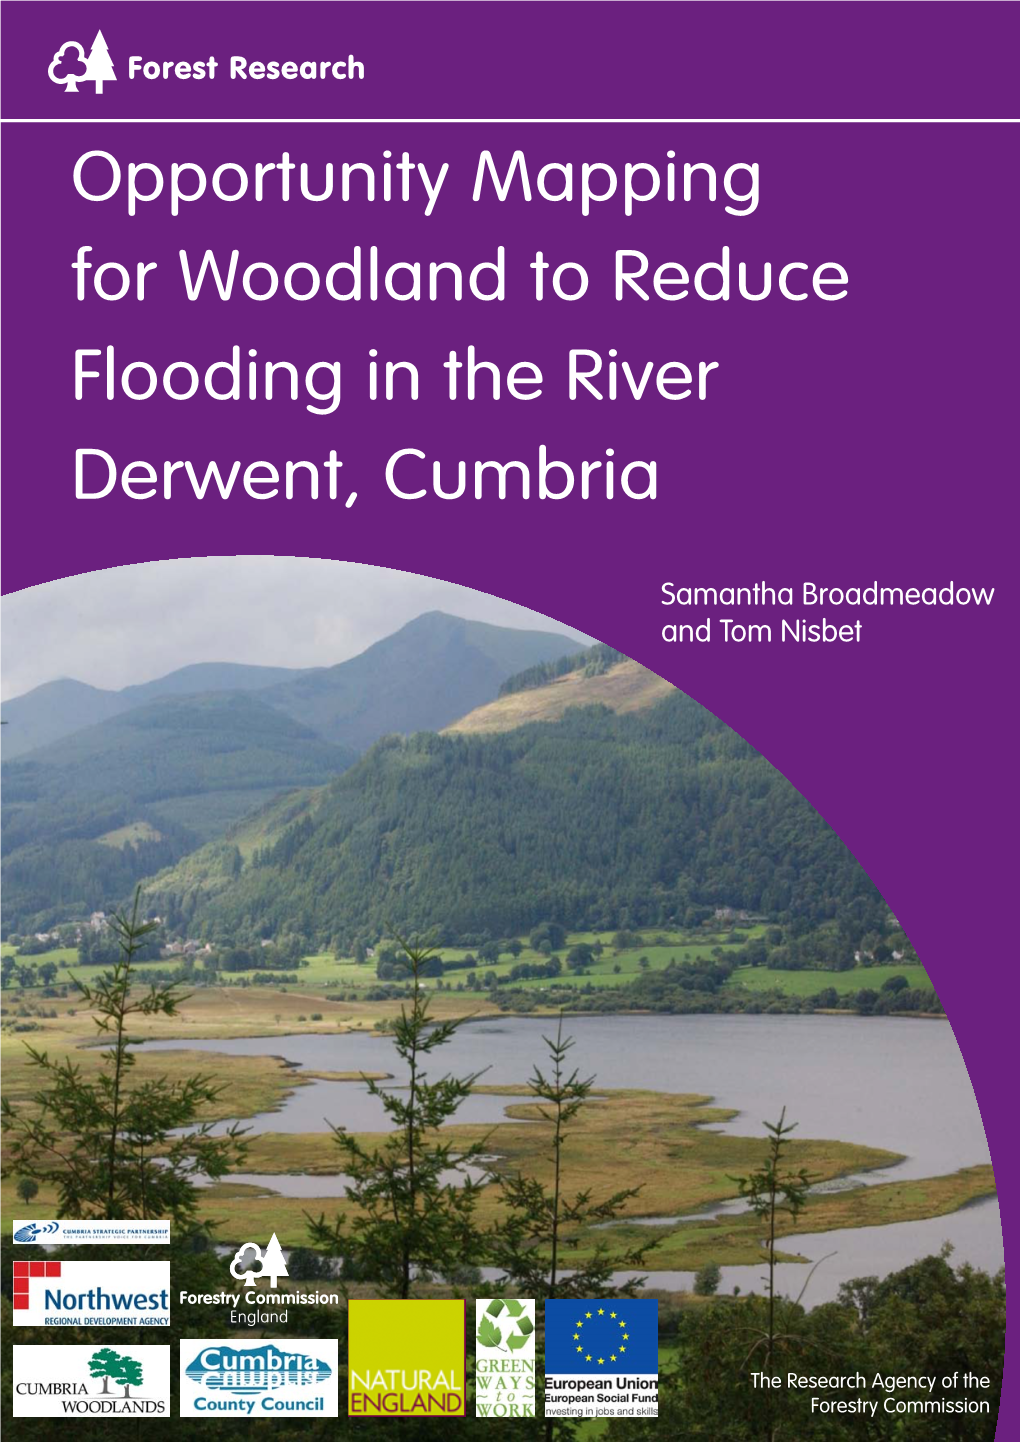 Opportunity Mapping for Woodland to Reduce Flooding in the River Derwent, Cumbria